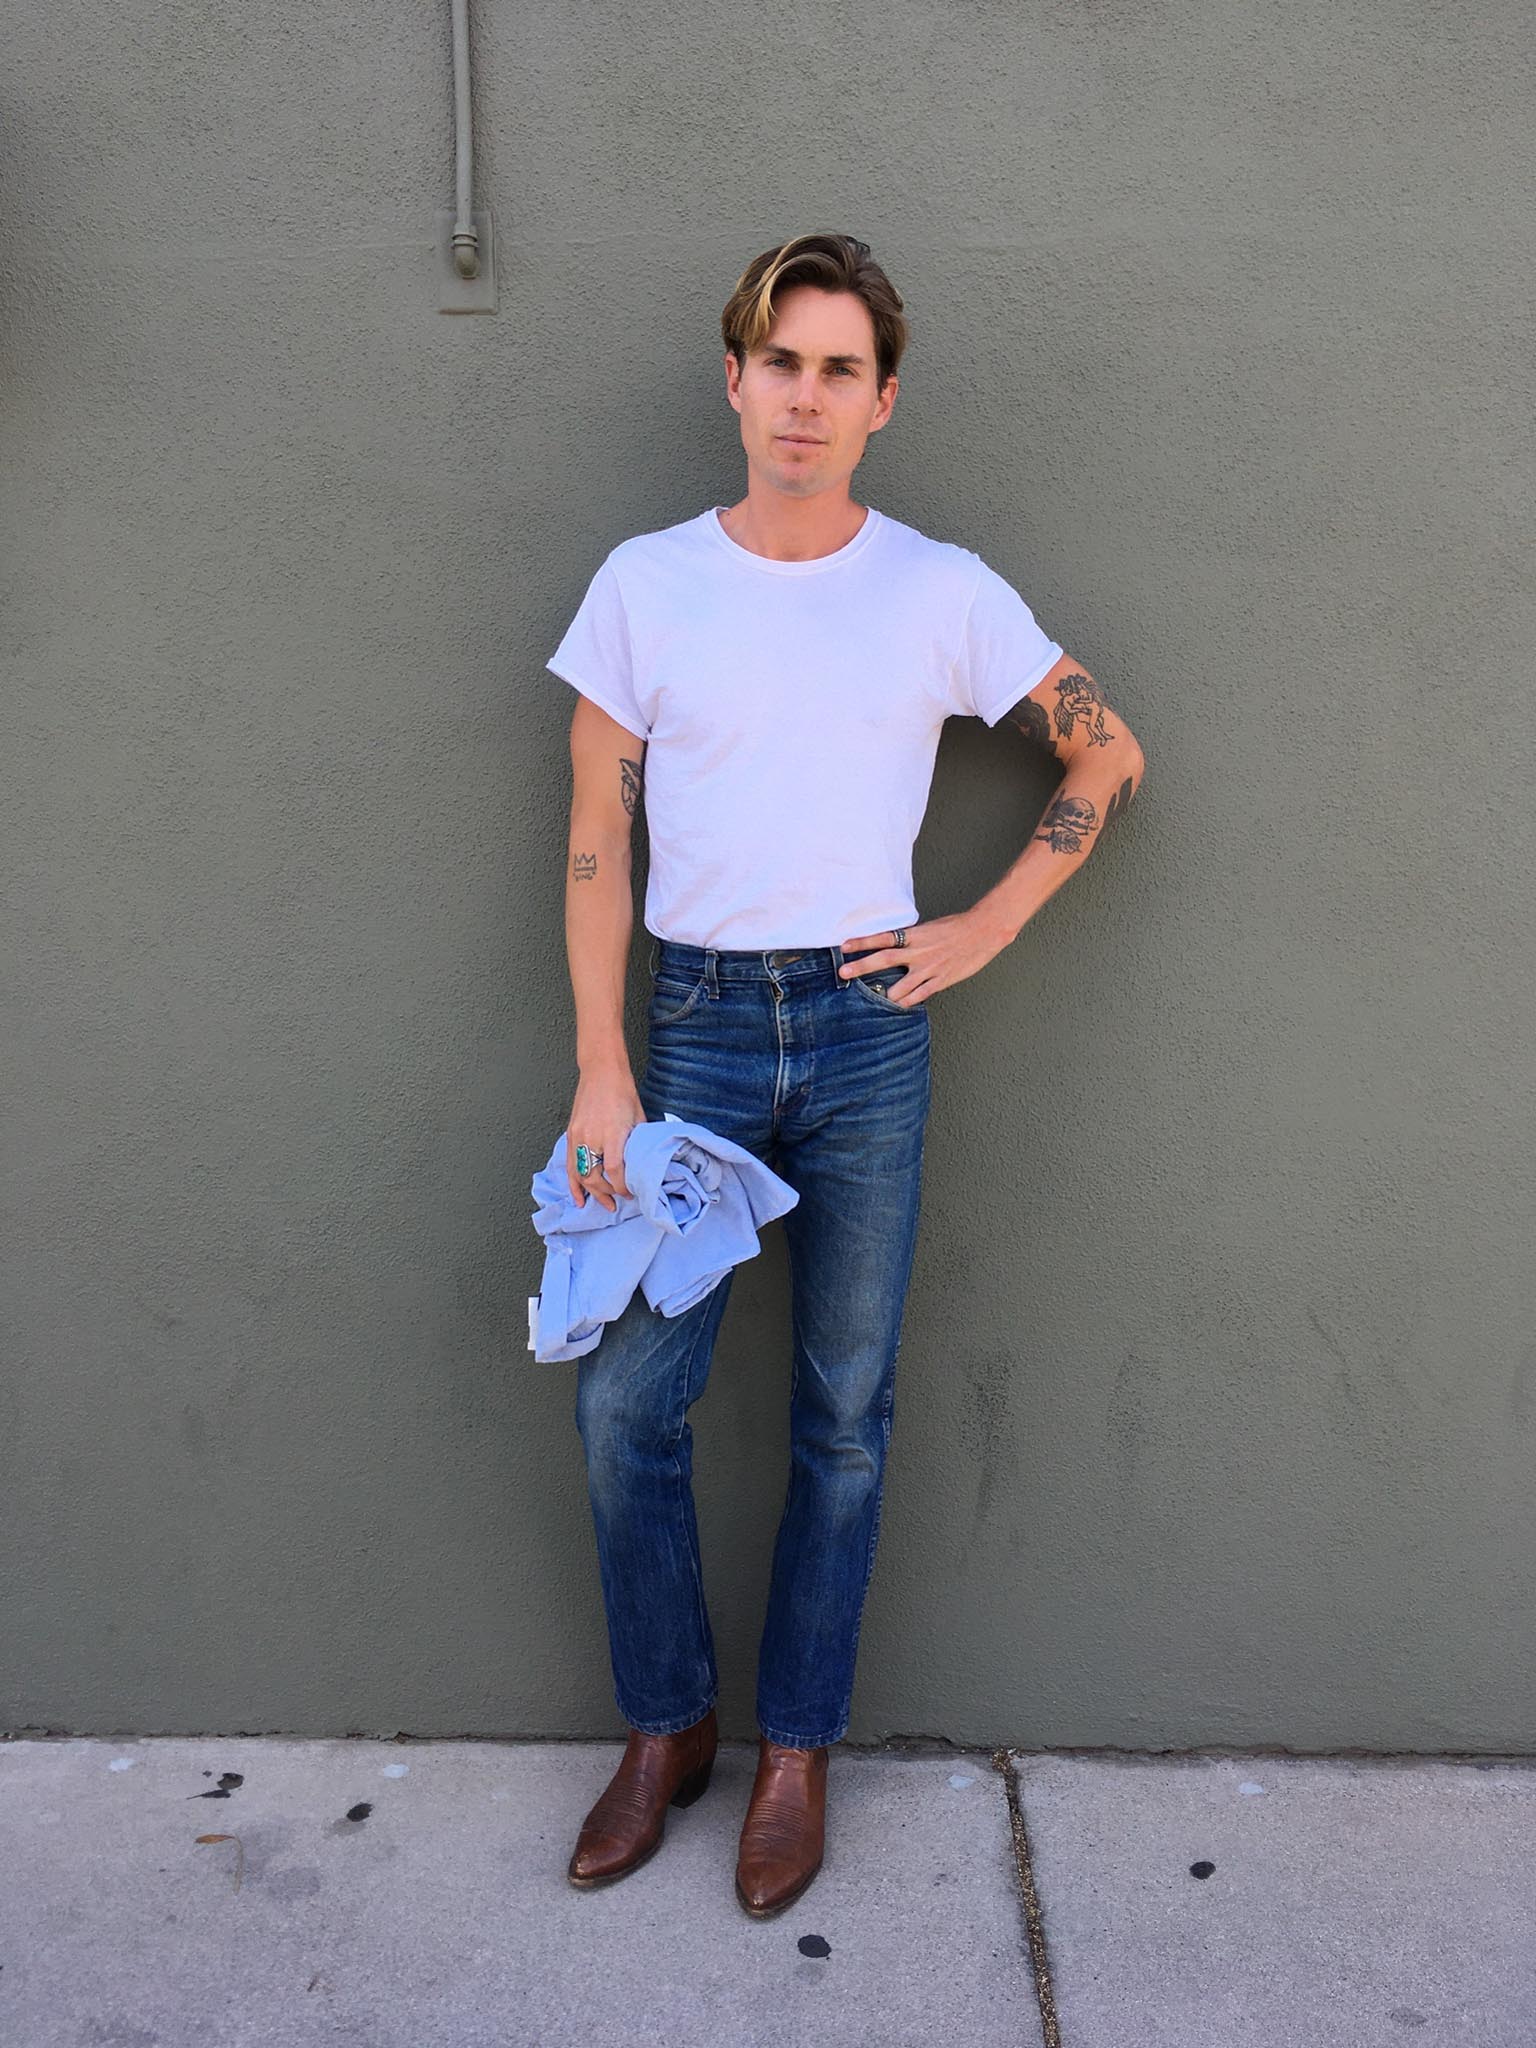 Classic jeans paired with plain white t-shirt and brown chelsea boots